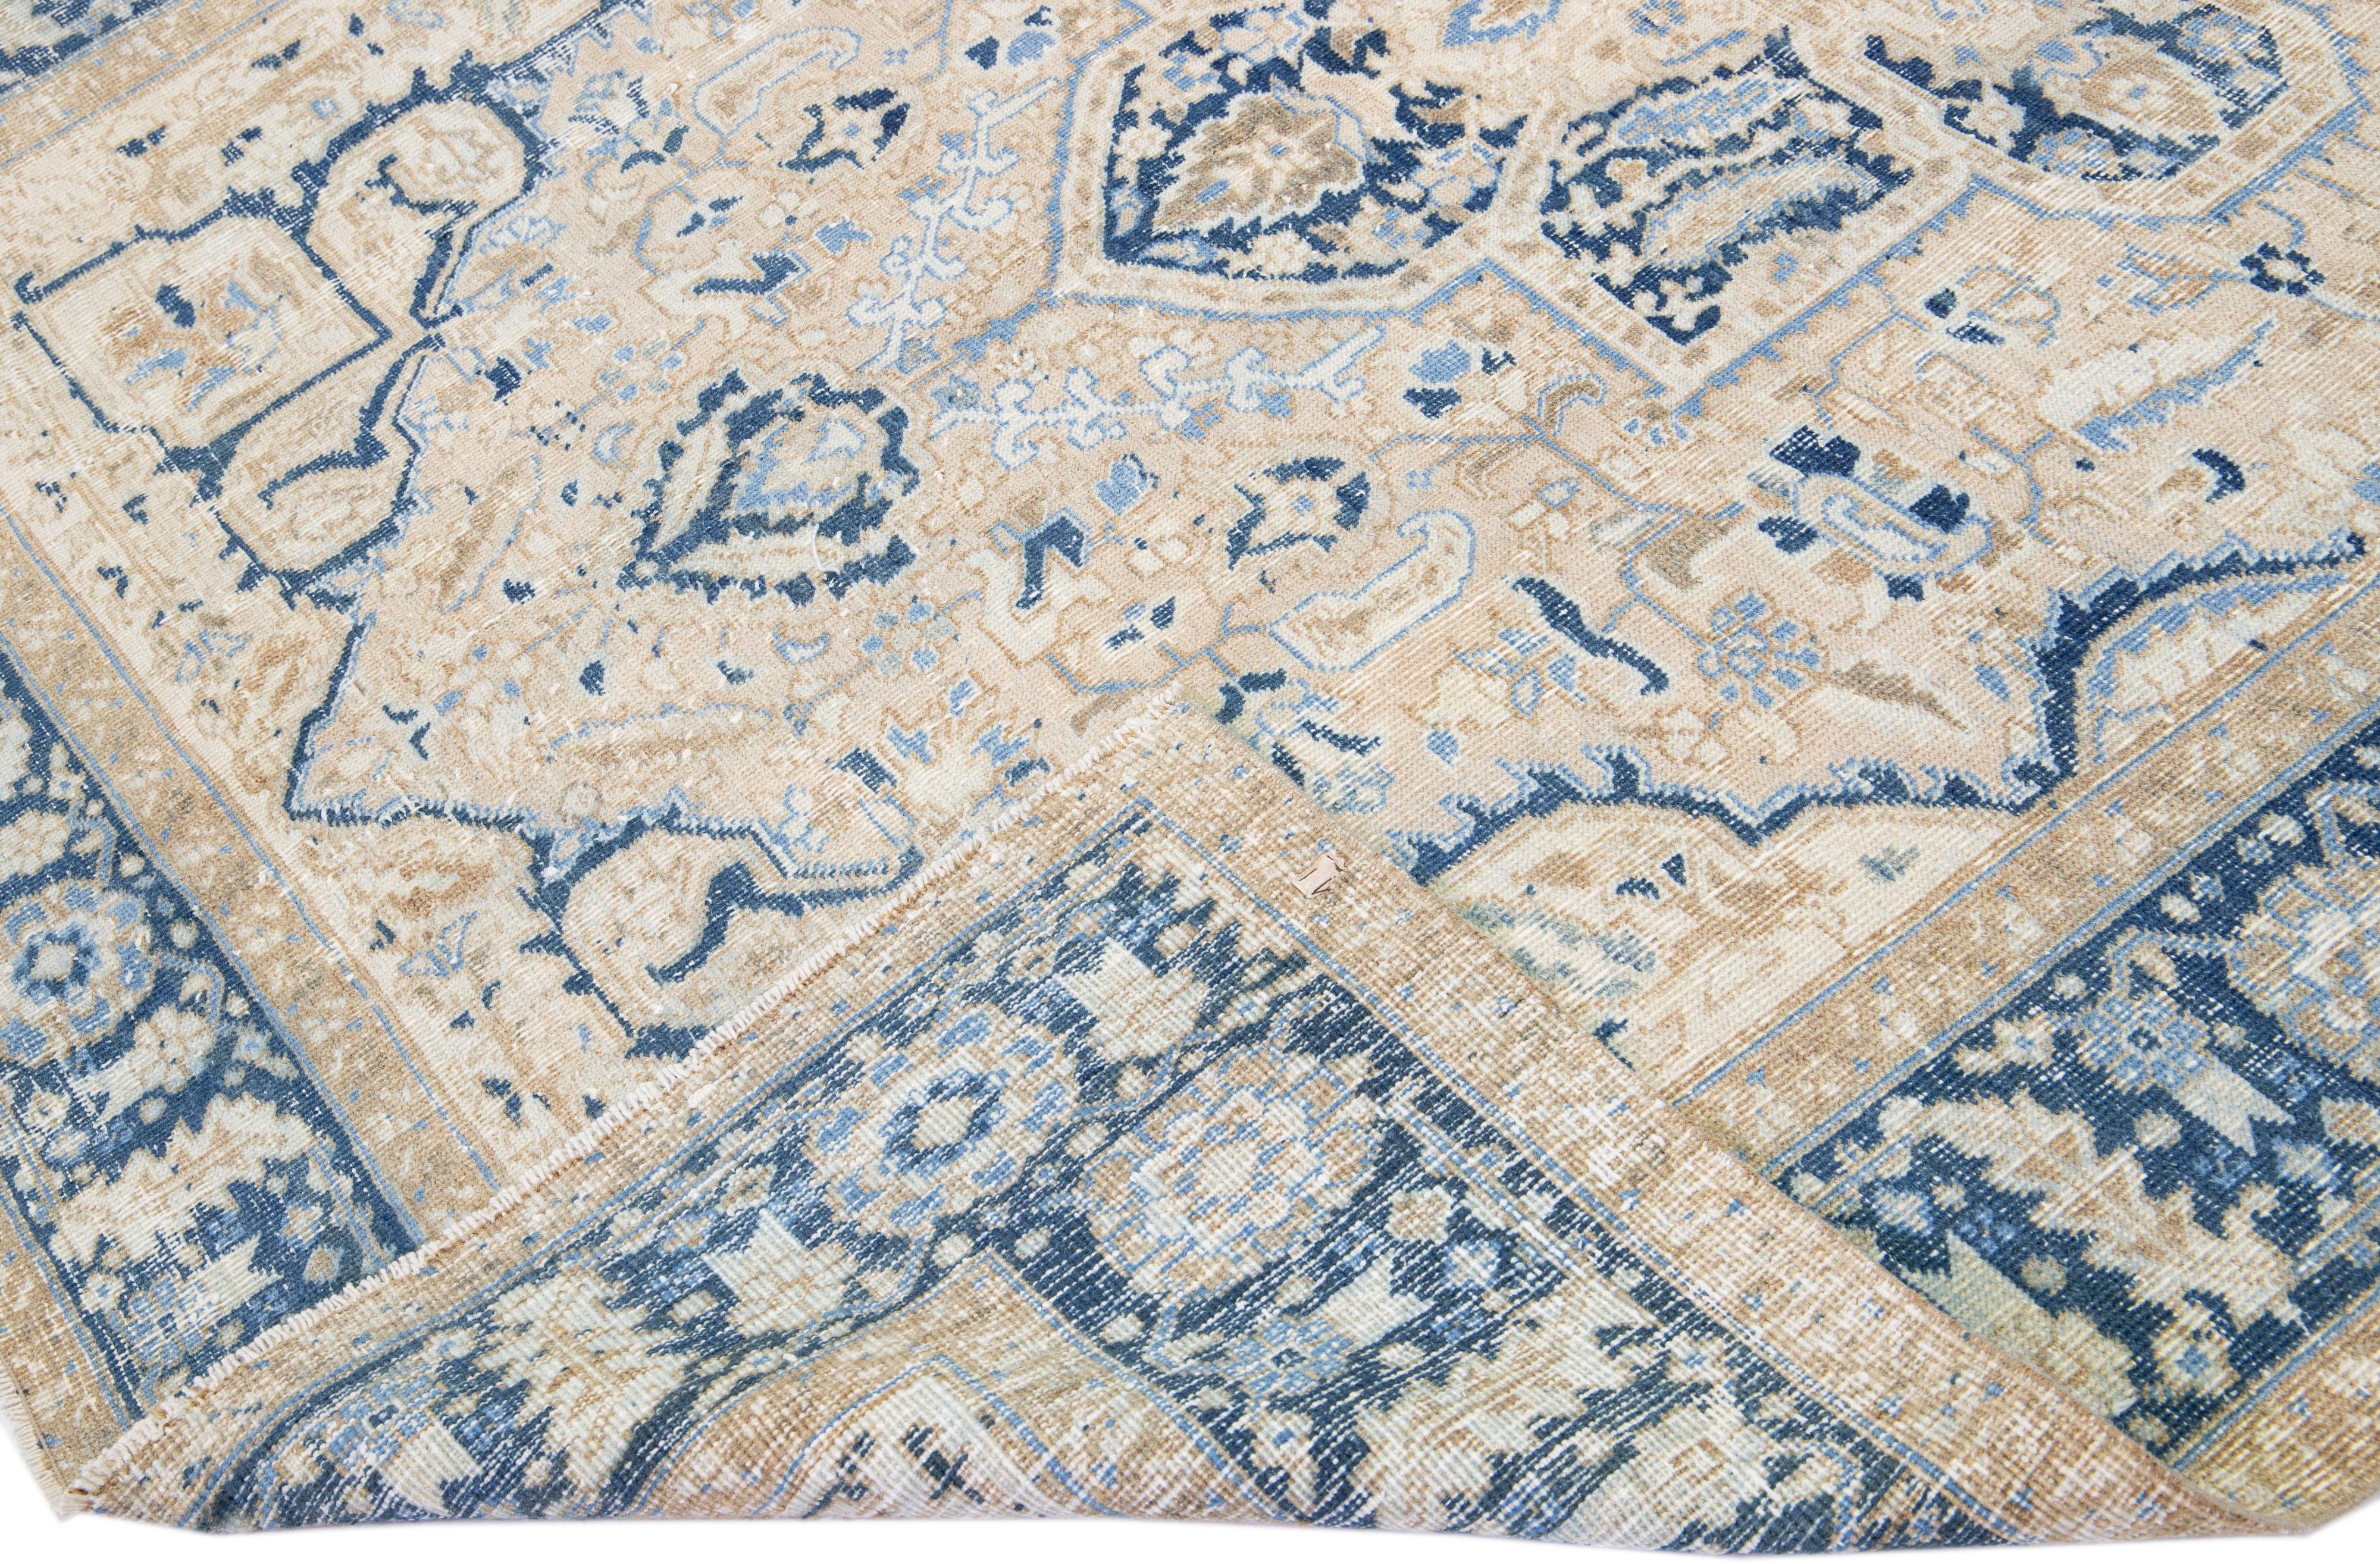 Beautiful antique Heriz hand-knotted wool rug with a beige color field. This Persian rug has a blue frame with tan accents in a gorgeous all-over geometric floral medallion design.

This rug measures: 7' x 9'3